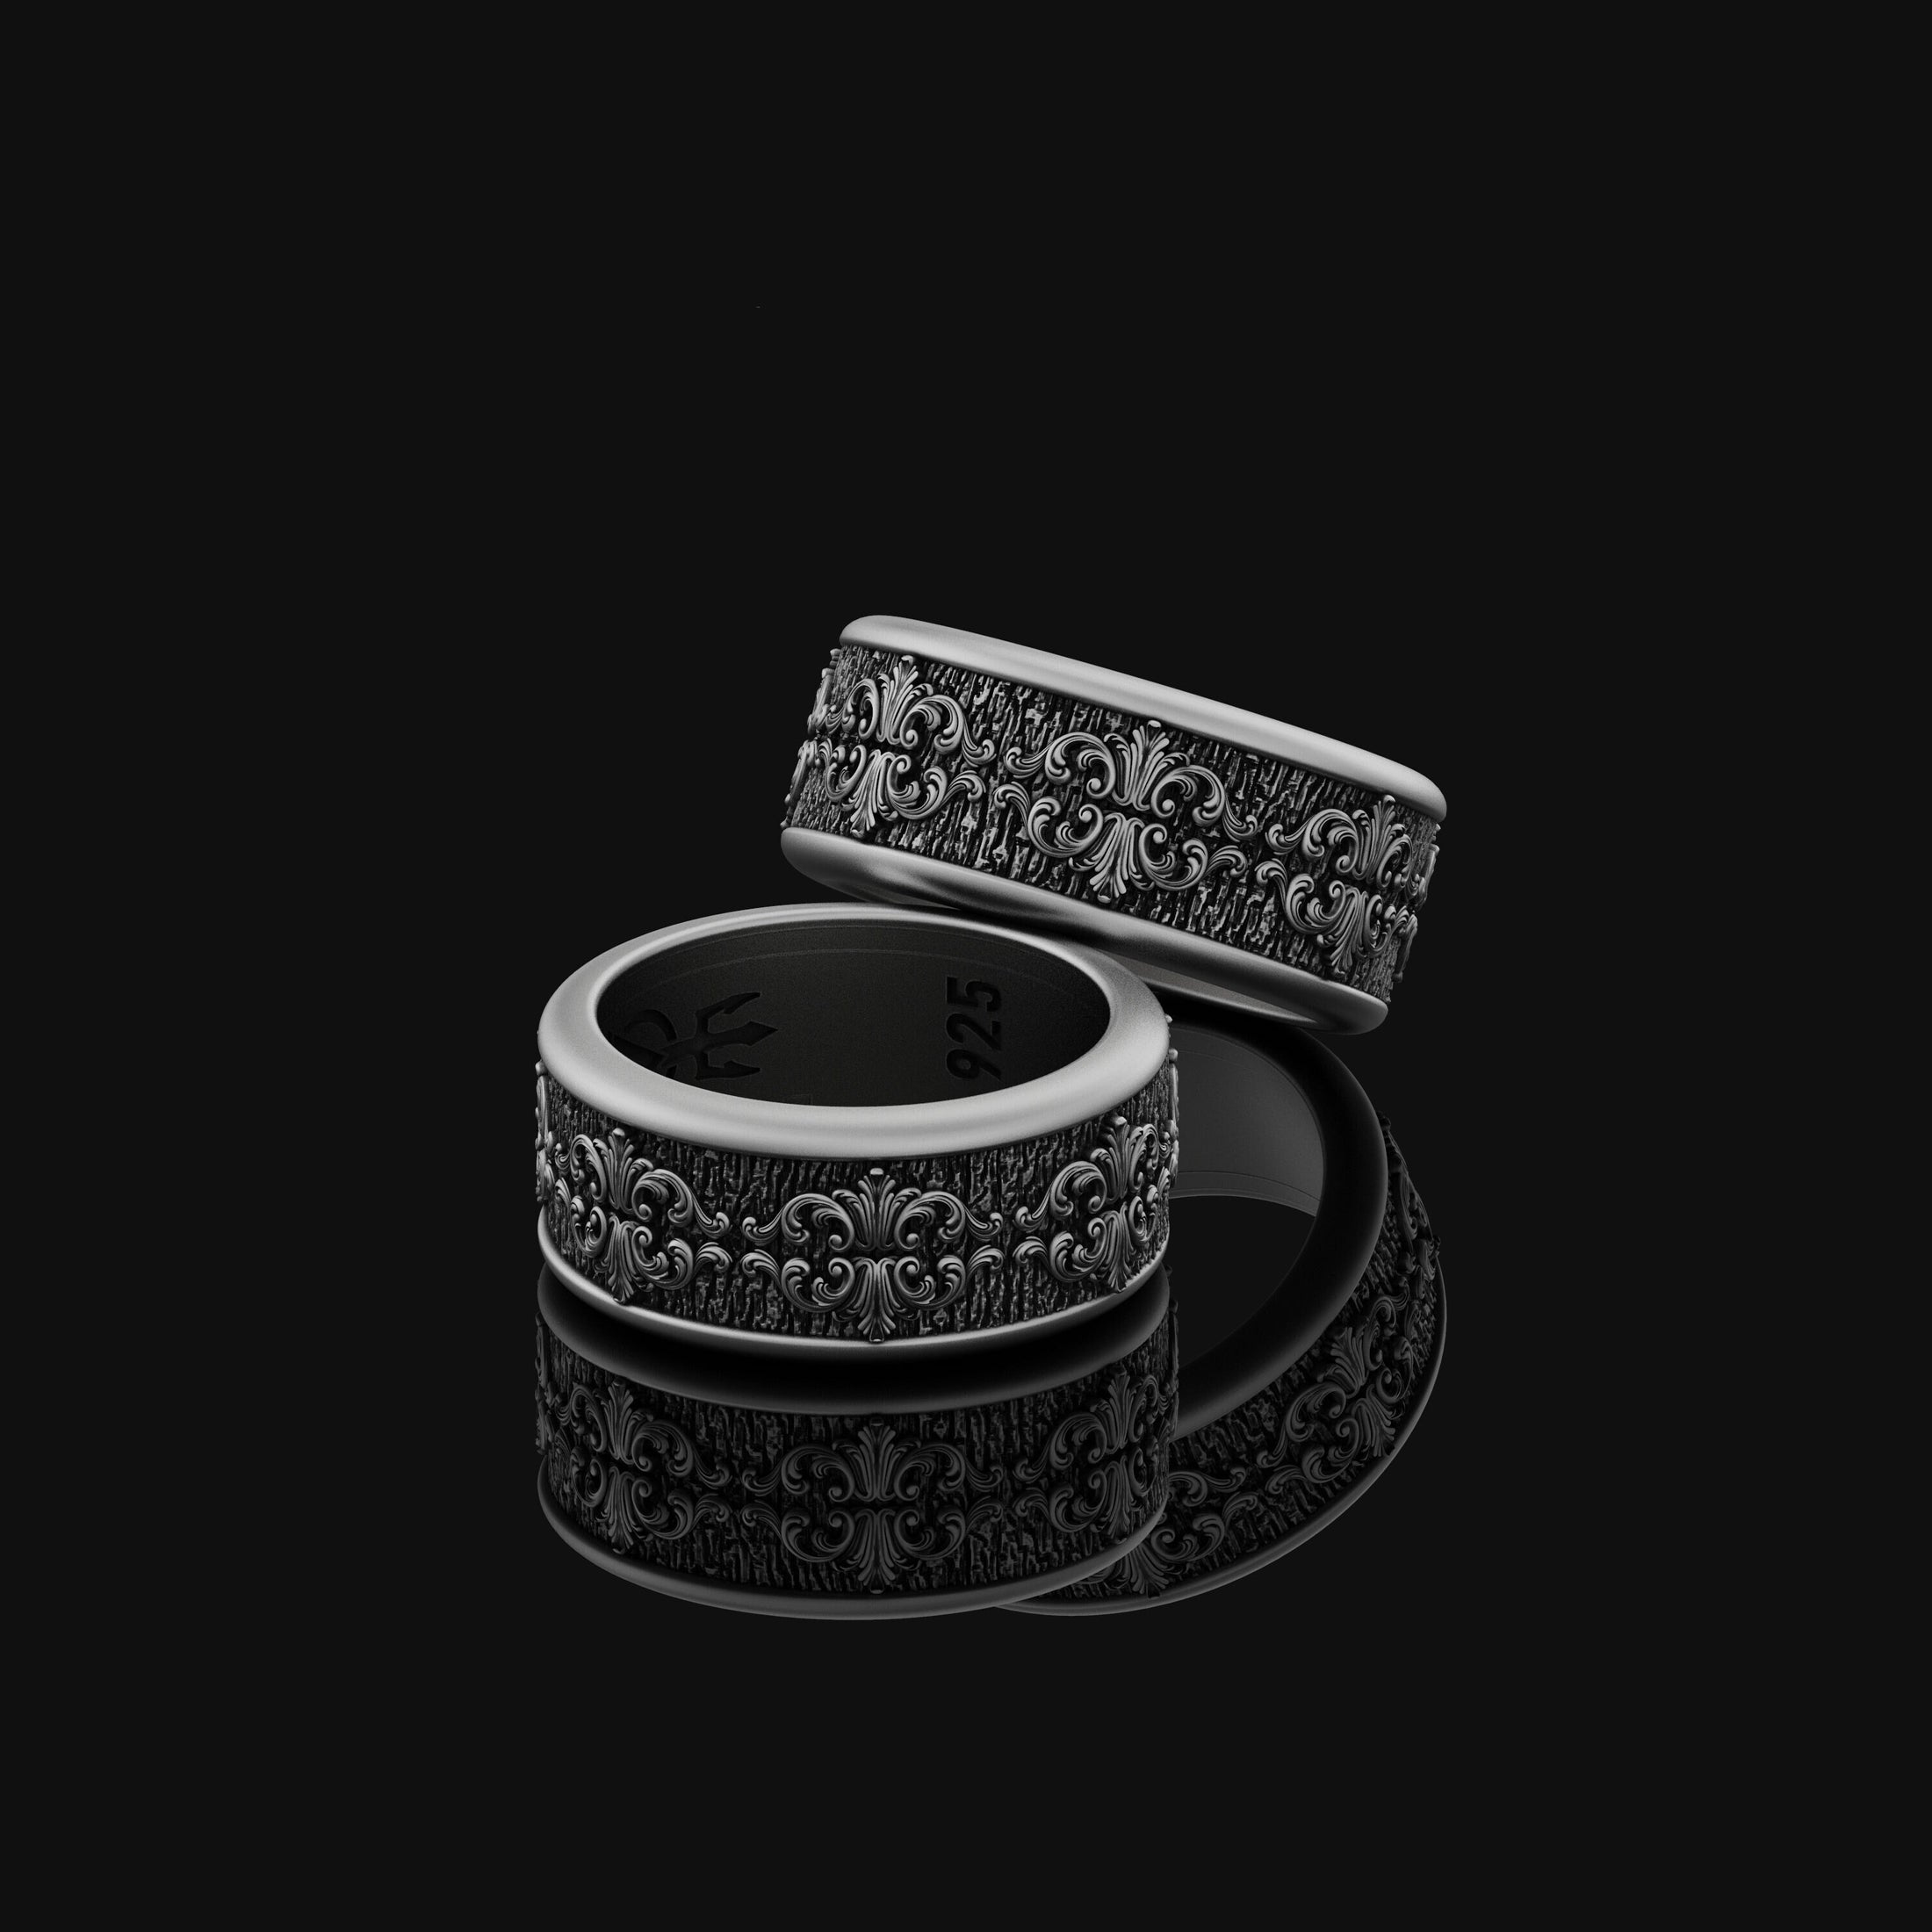 Floral Victorian Style Rotating Wedding Band Ring Oxidized Finish